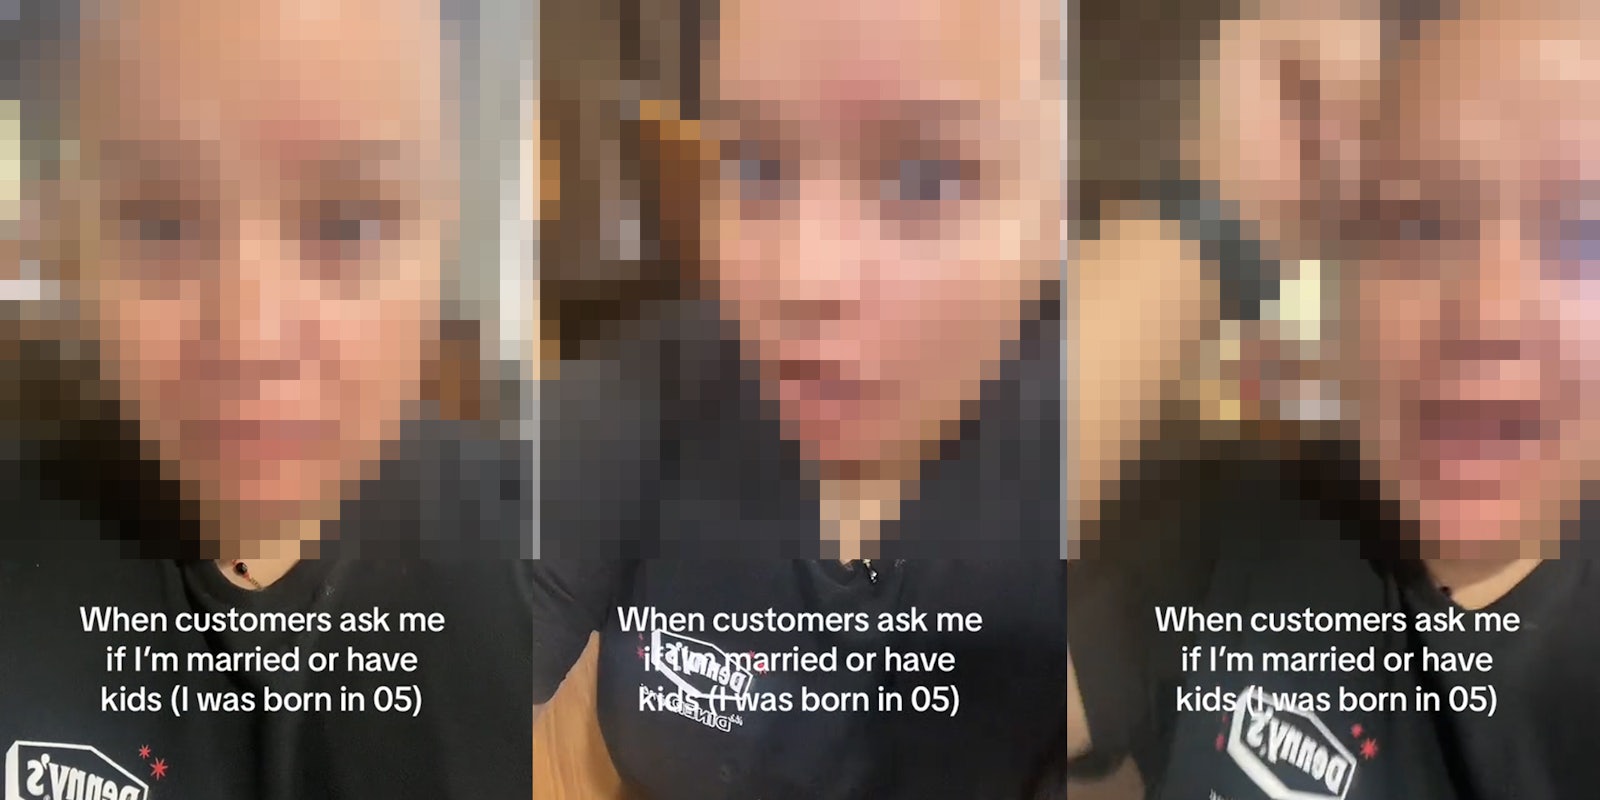 server blurred with caption 'When customers ask me if I'm married or have kids (I was born in 05)' (l) server blurred with caption 'When customers ask me if I'm married or have kids (I was born in 05)' (c) server blurred with caption 'When customers ask me if I'm married or have kids (I was born in 05)' (r)